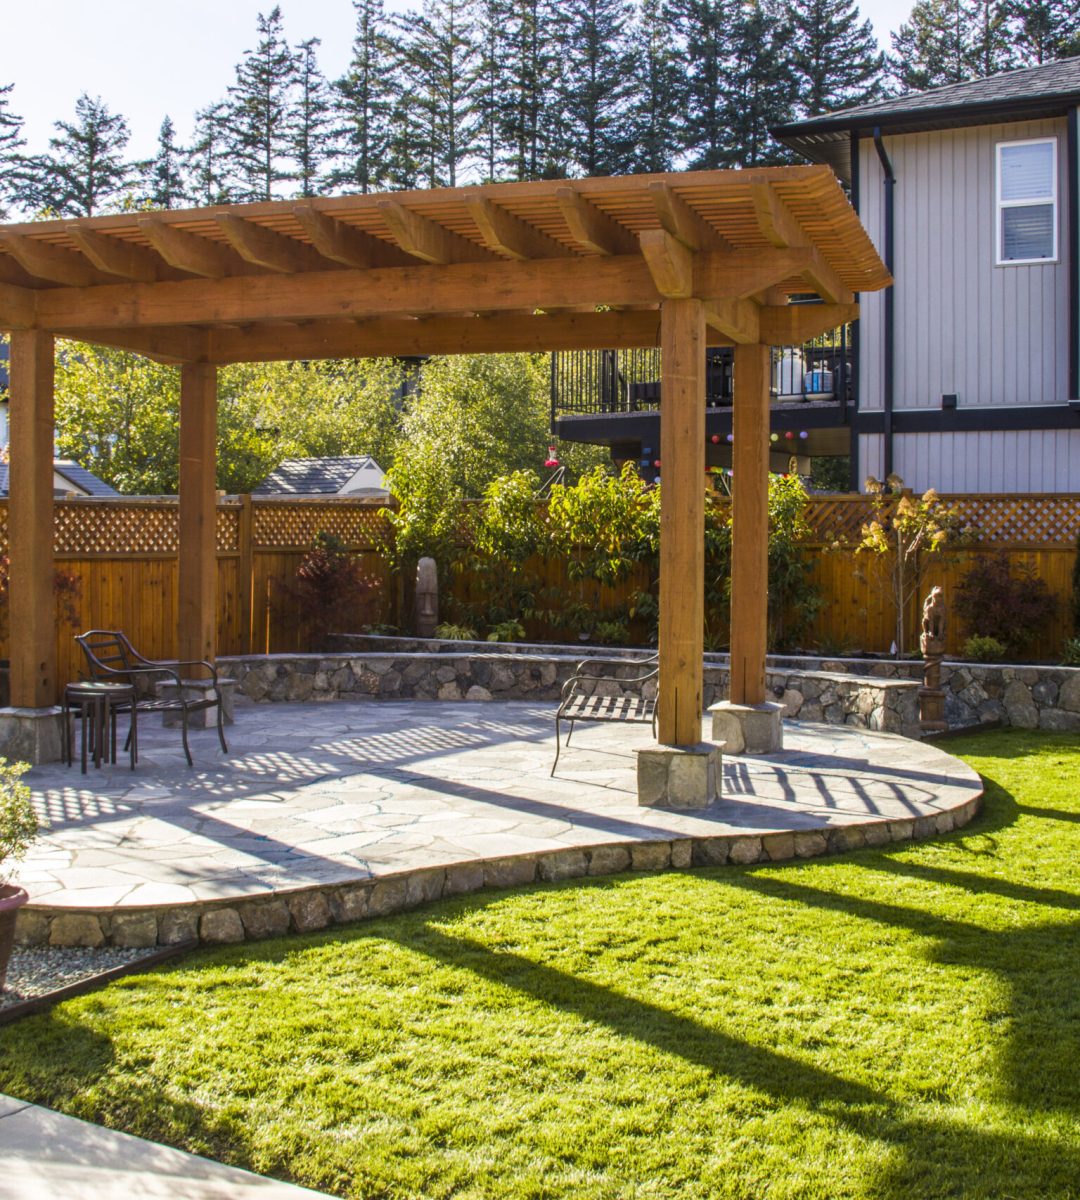 Pergola example project from Down to Earth Landscaping